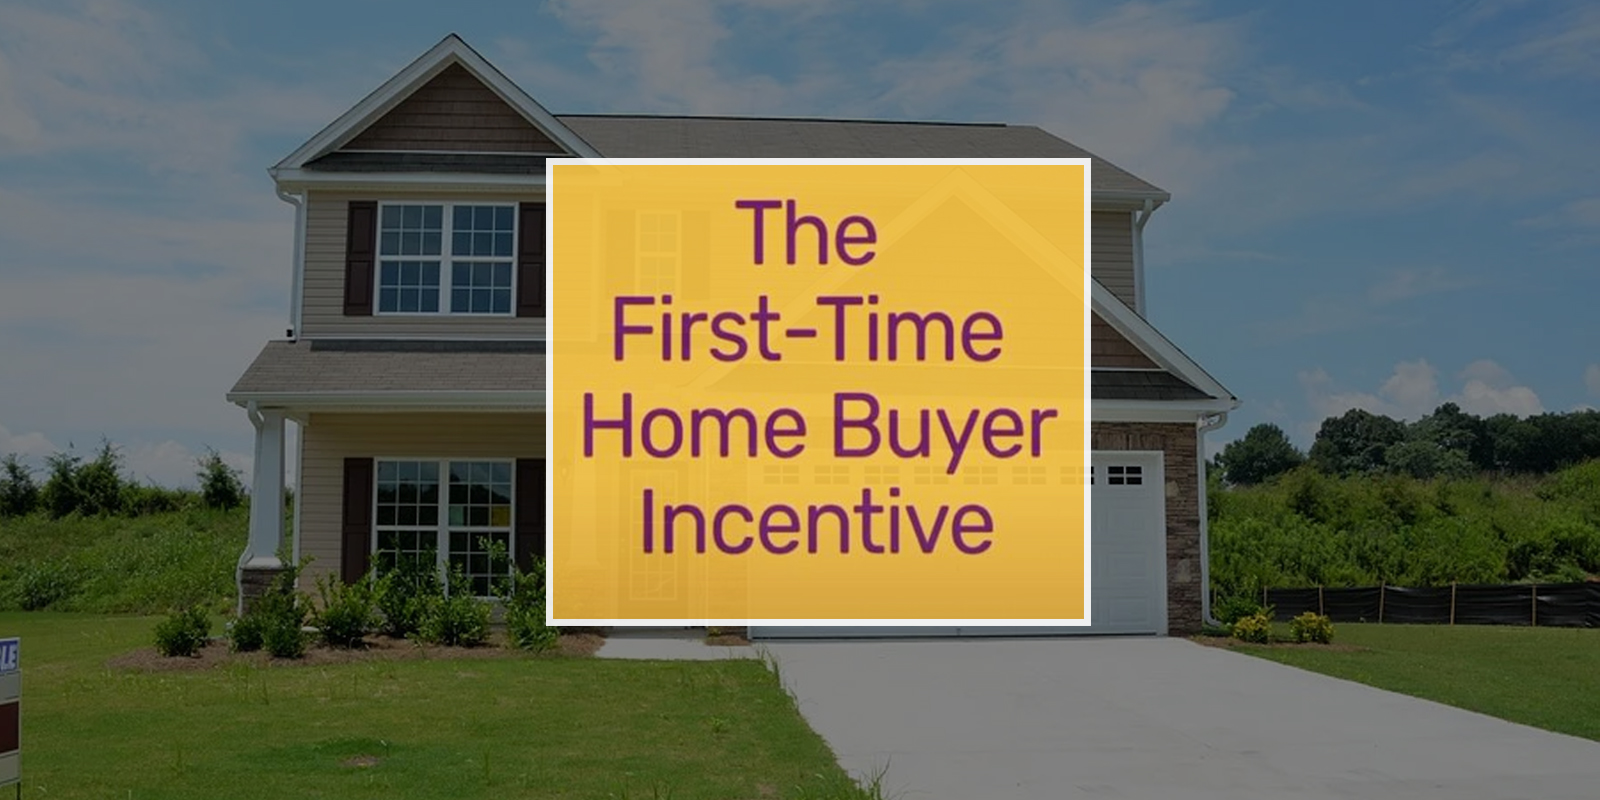 What is the First-Time Home Buyer Incentive?